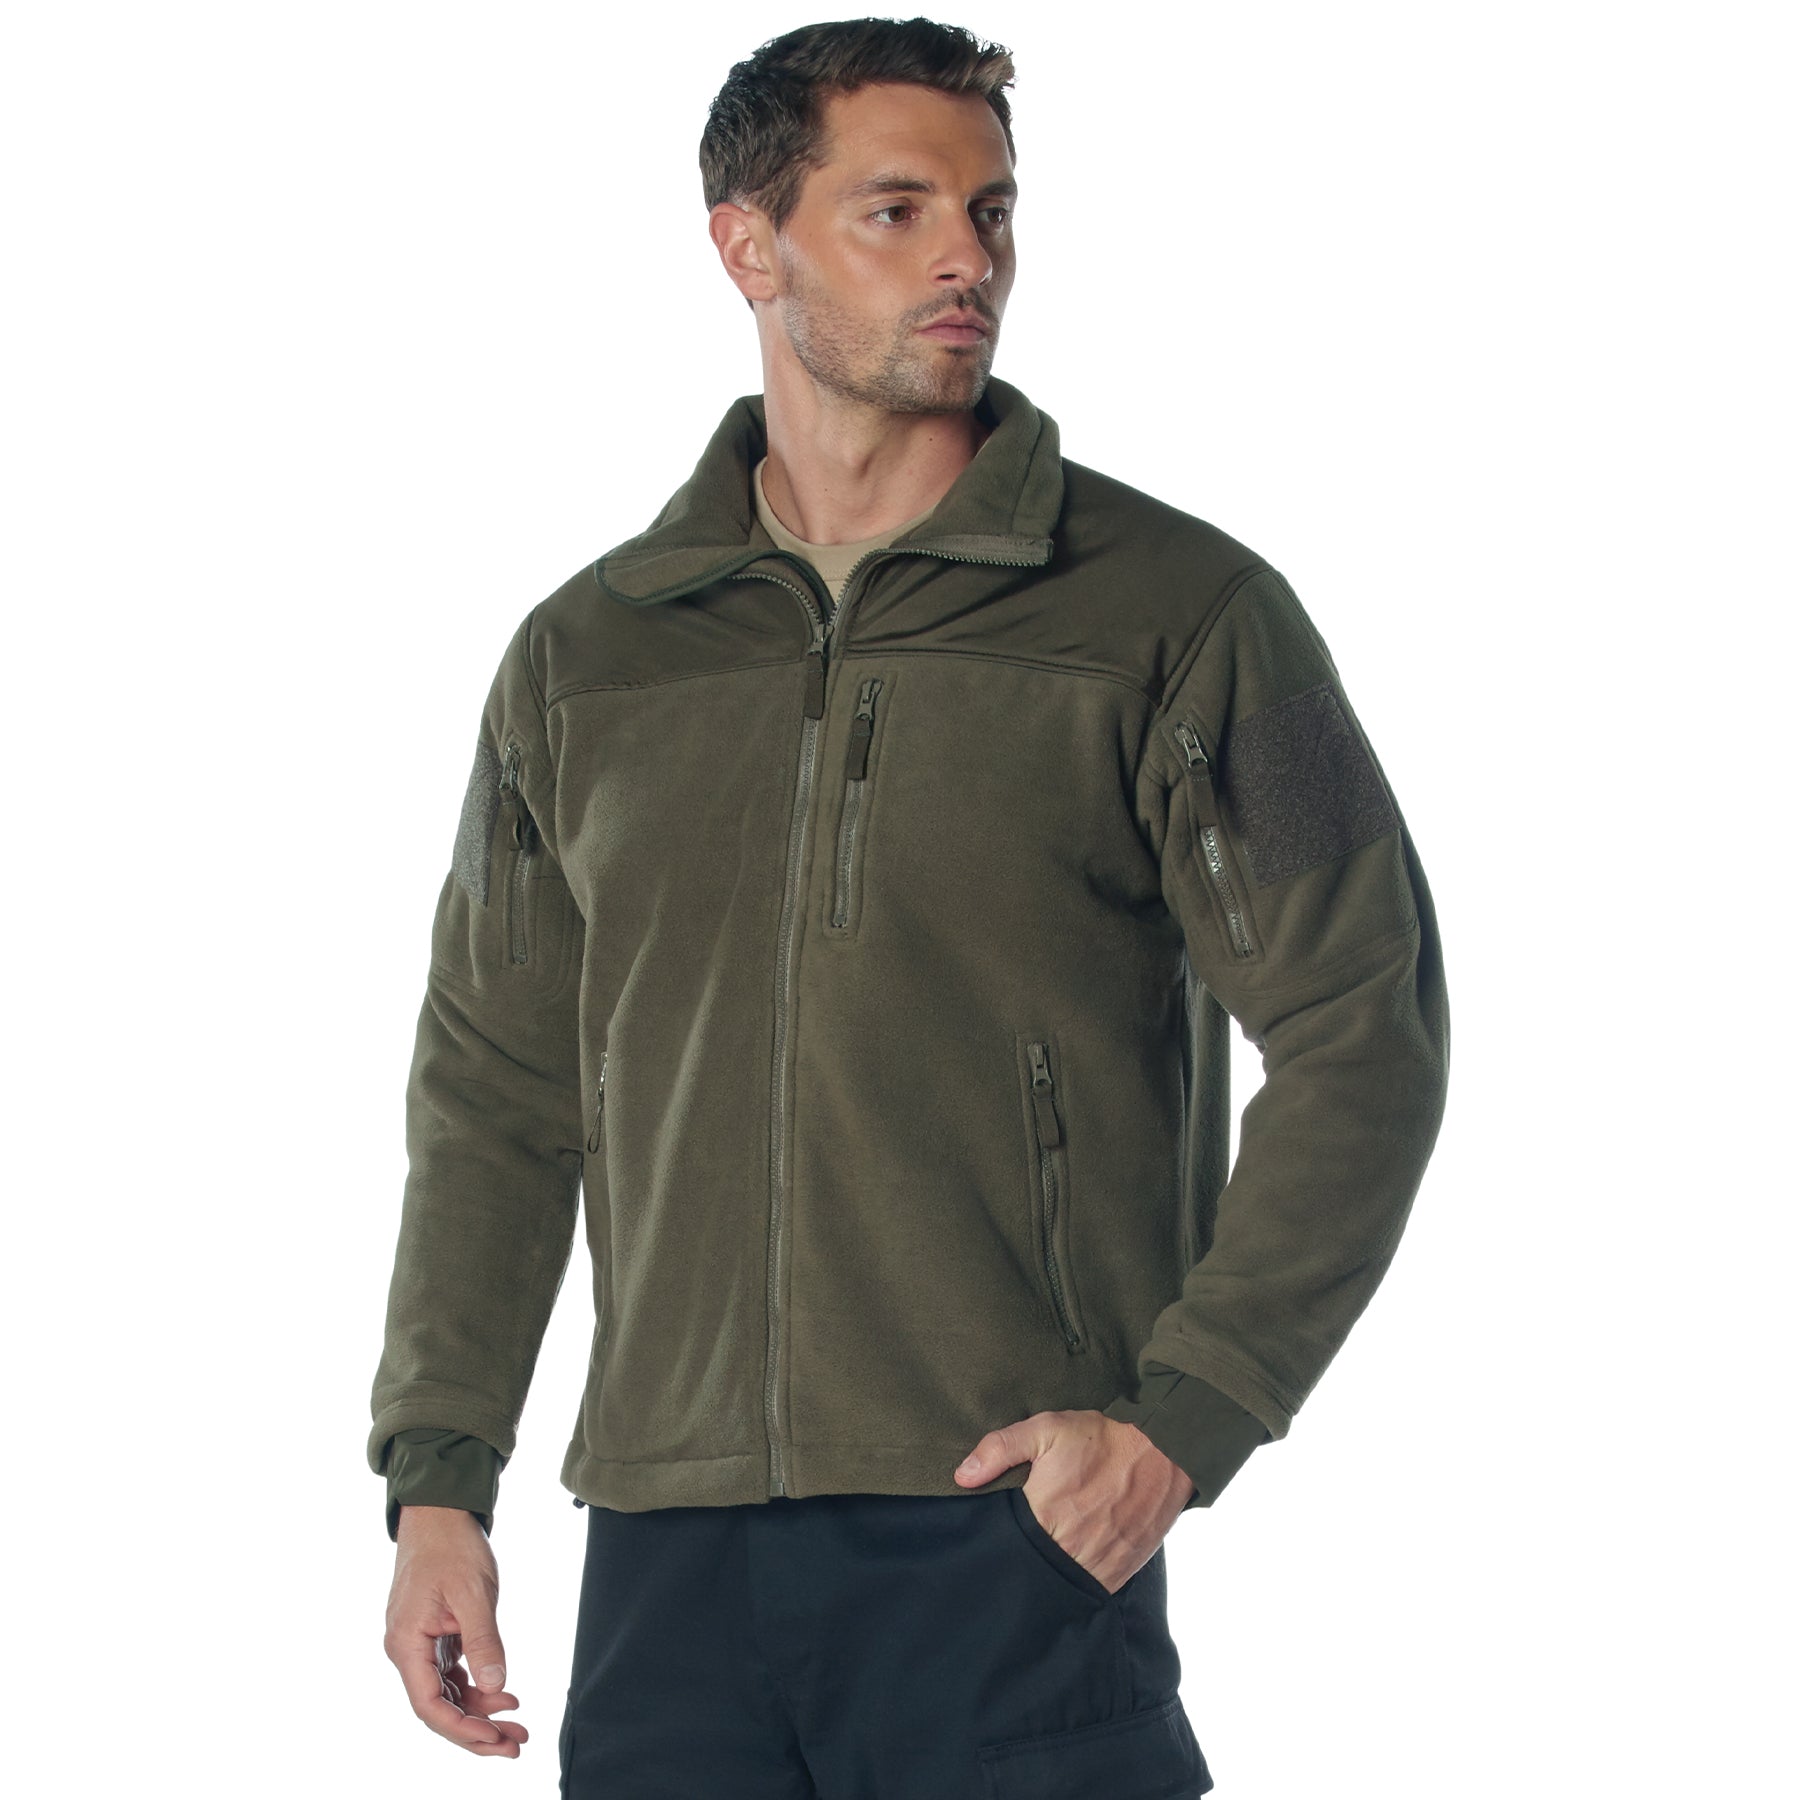 Poly Spec Ops Tactical Fleece Jackets Olive Drab